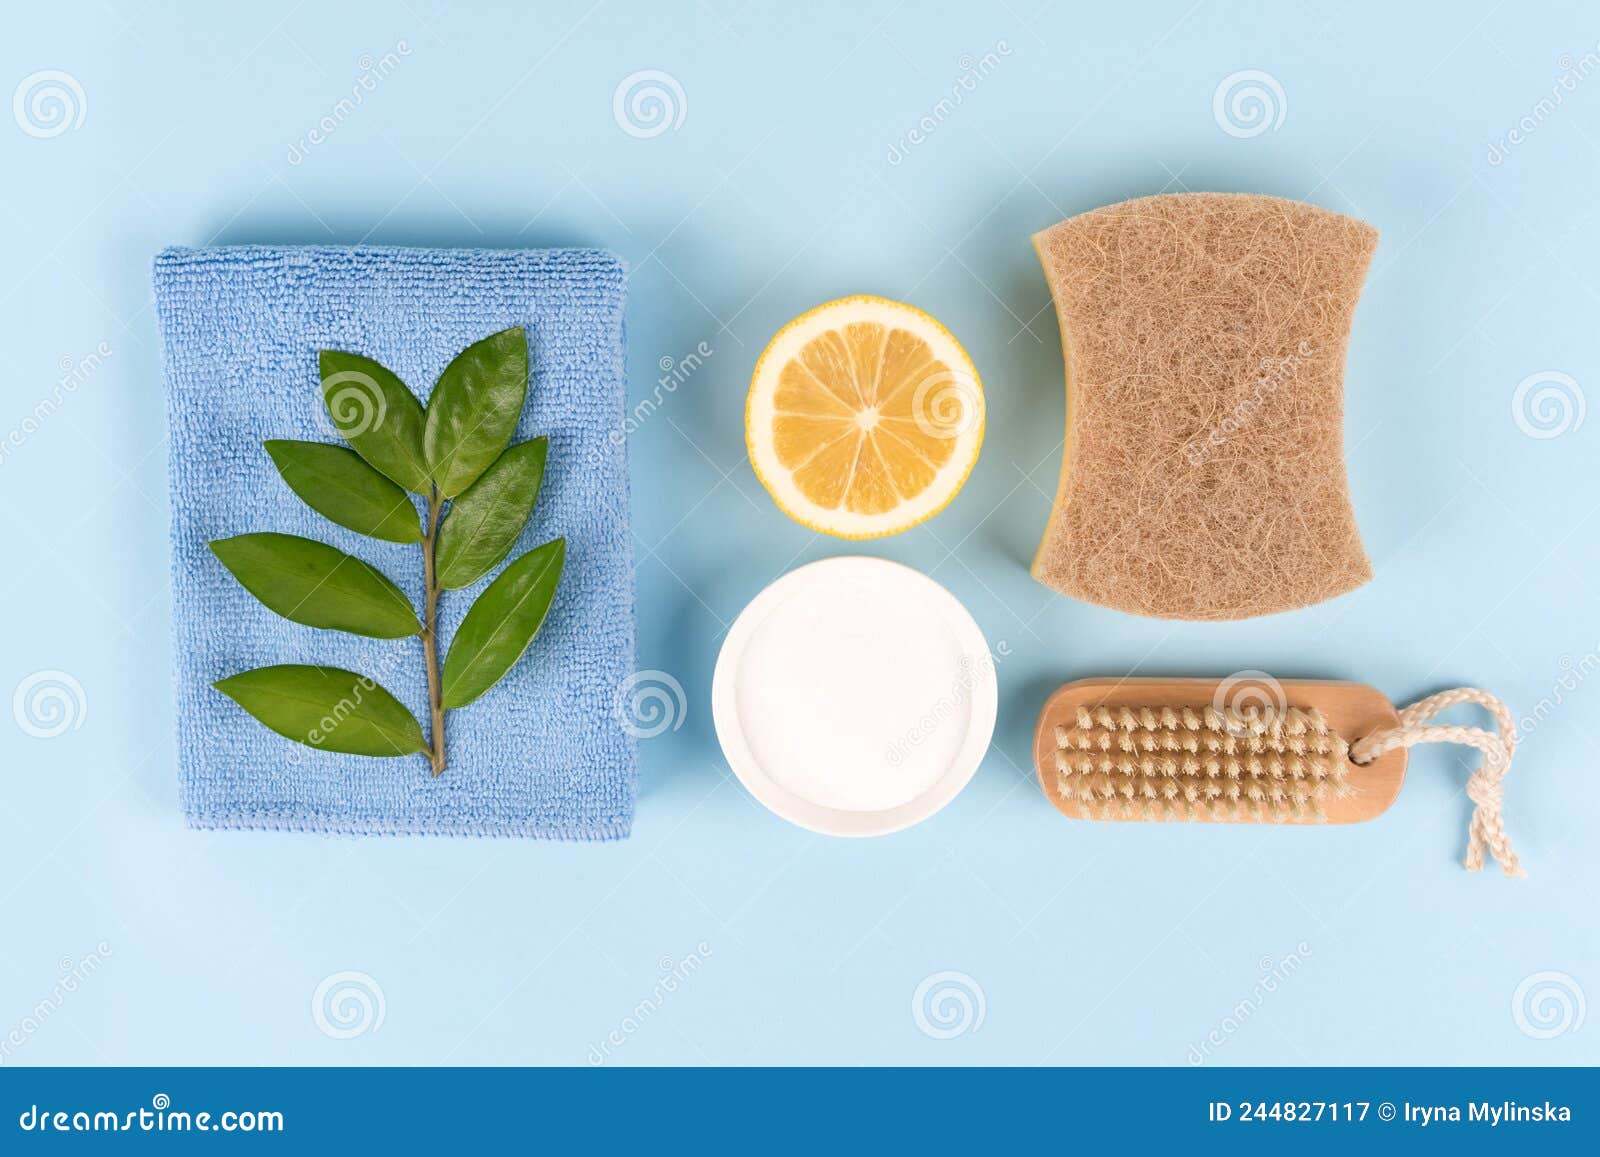 natural household cleaners - baking soda, lemon, citric acid, bamboo brush, natural sponge on blue background with copy space